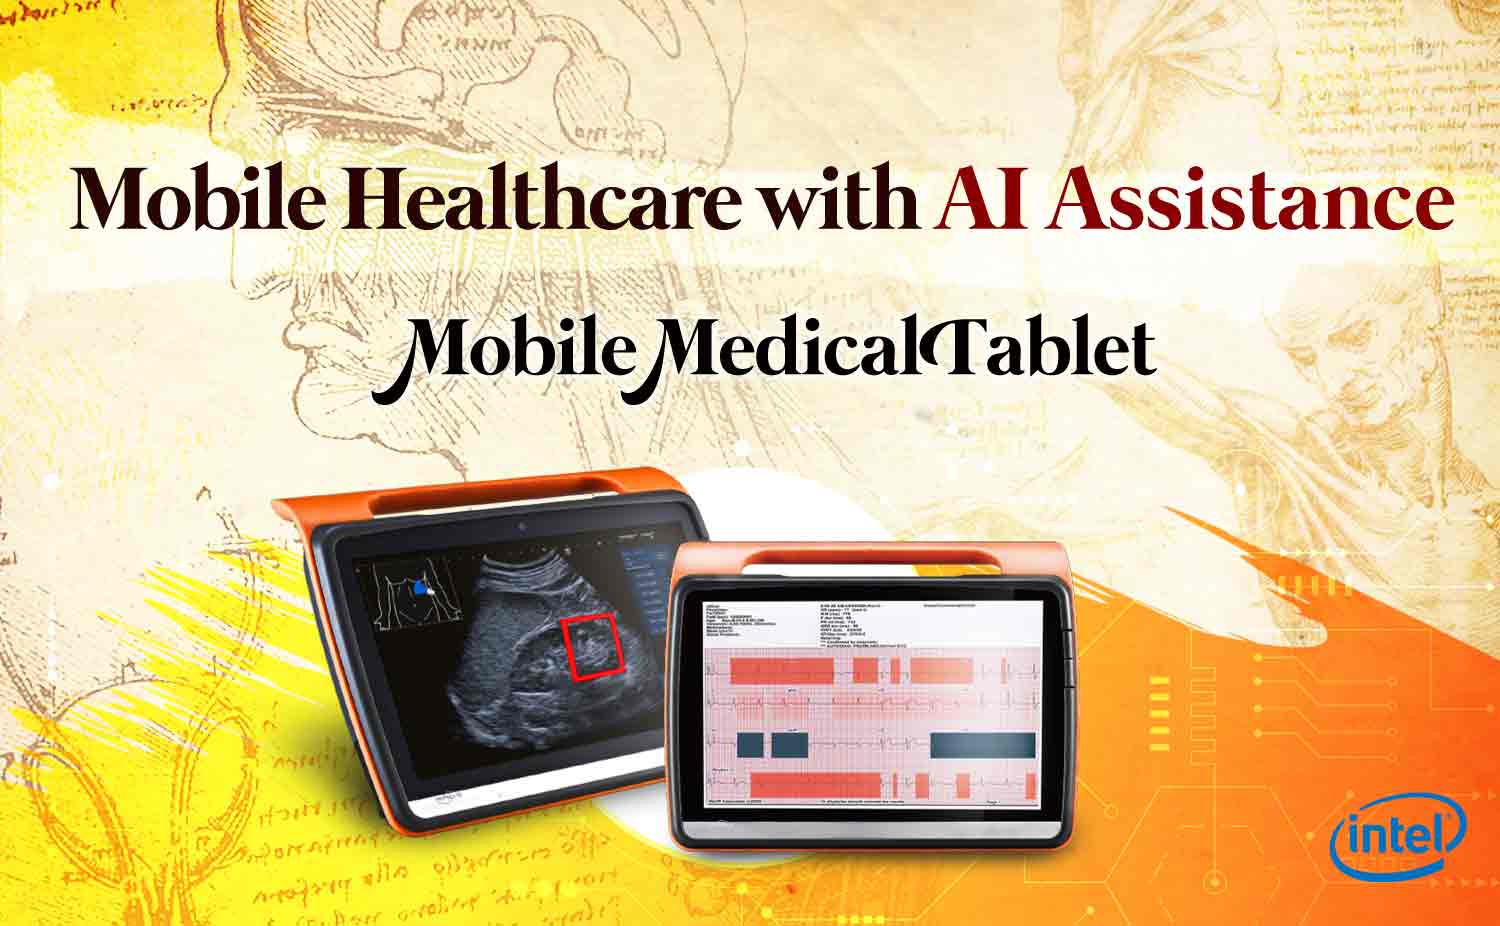 Mobile Healthcare with AI Assistance - Application